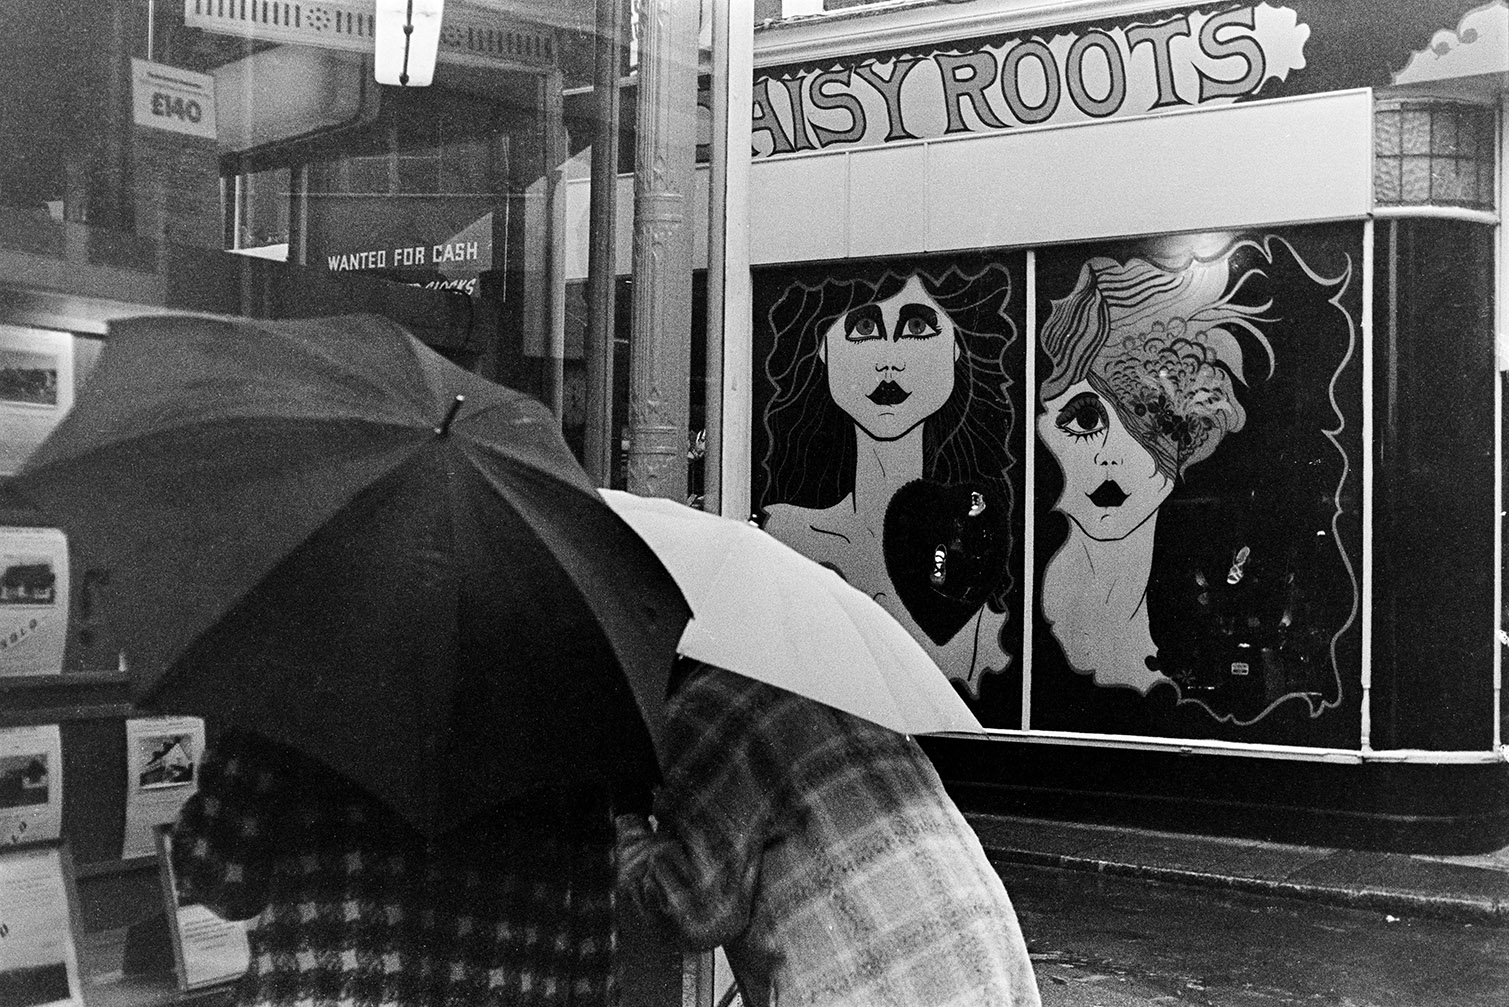 Two people with umbrellas looking in a estate agent's shop window in Barnstaple. Opposite is the shop window of Daisy Roots show shop, with artwork.